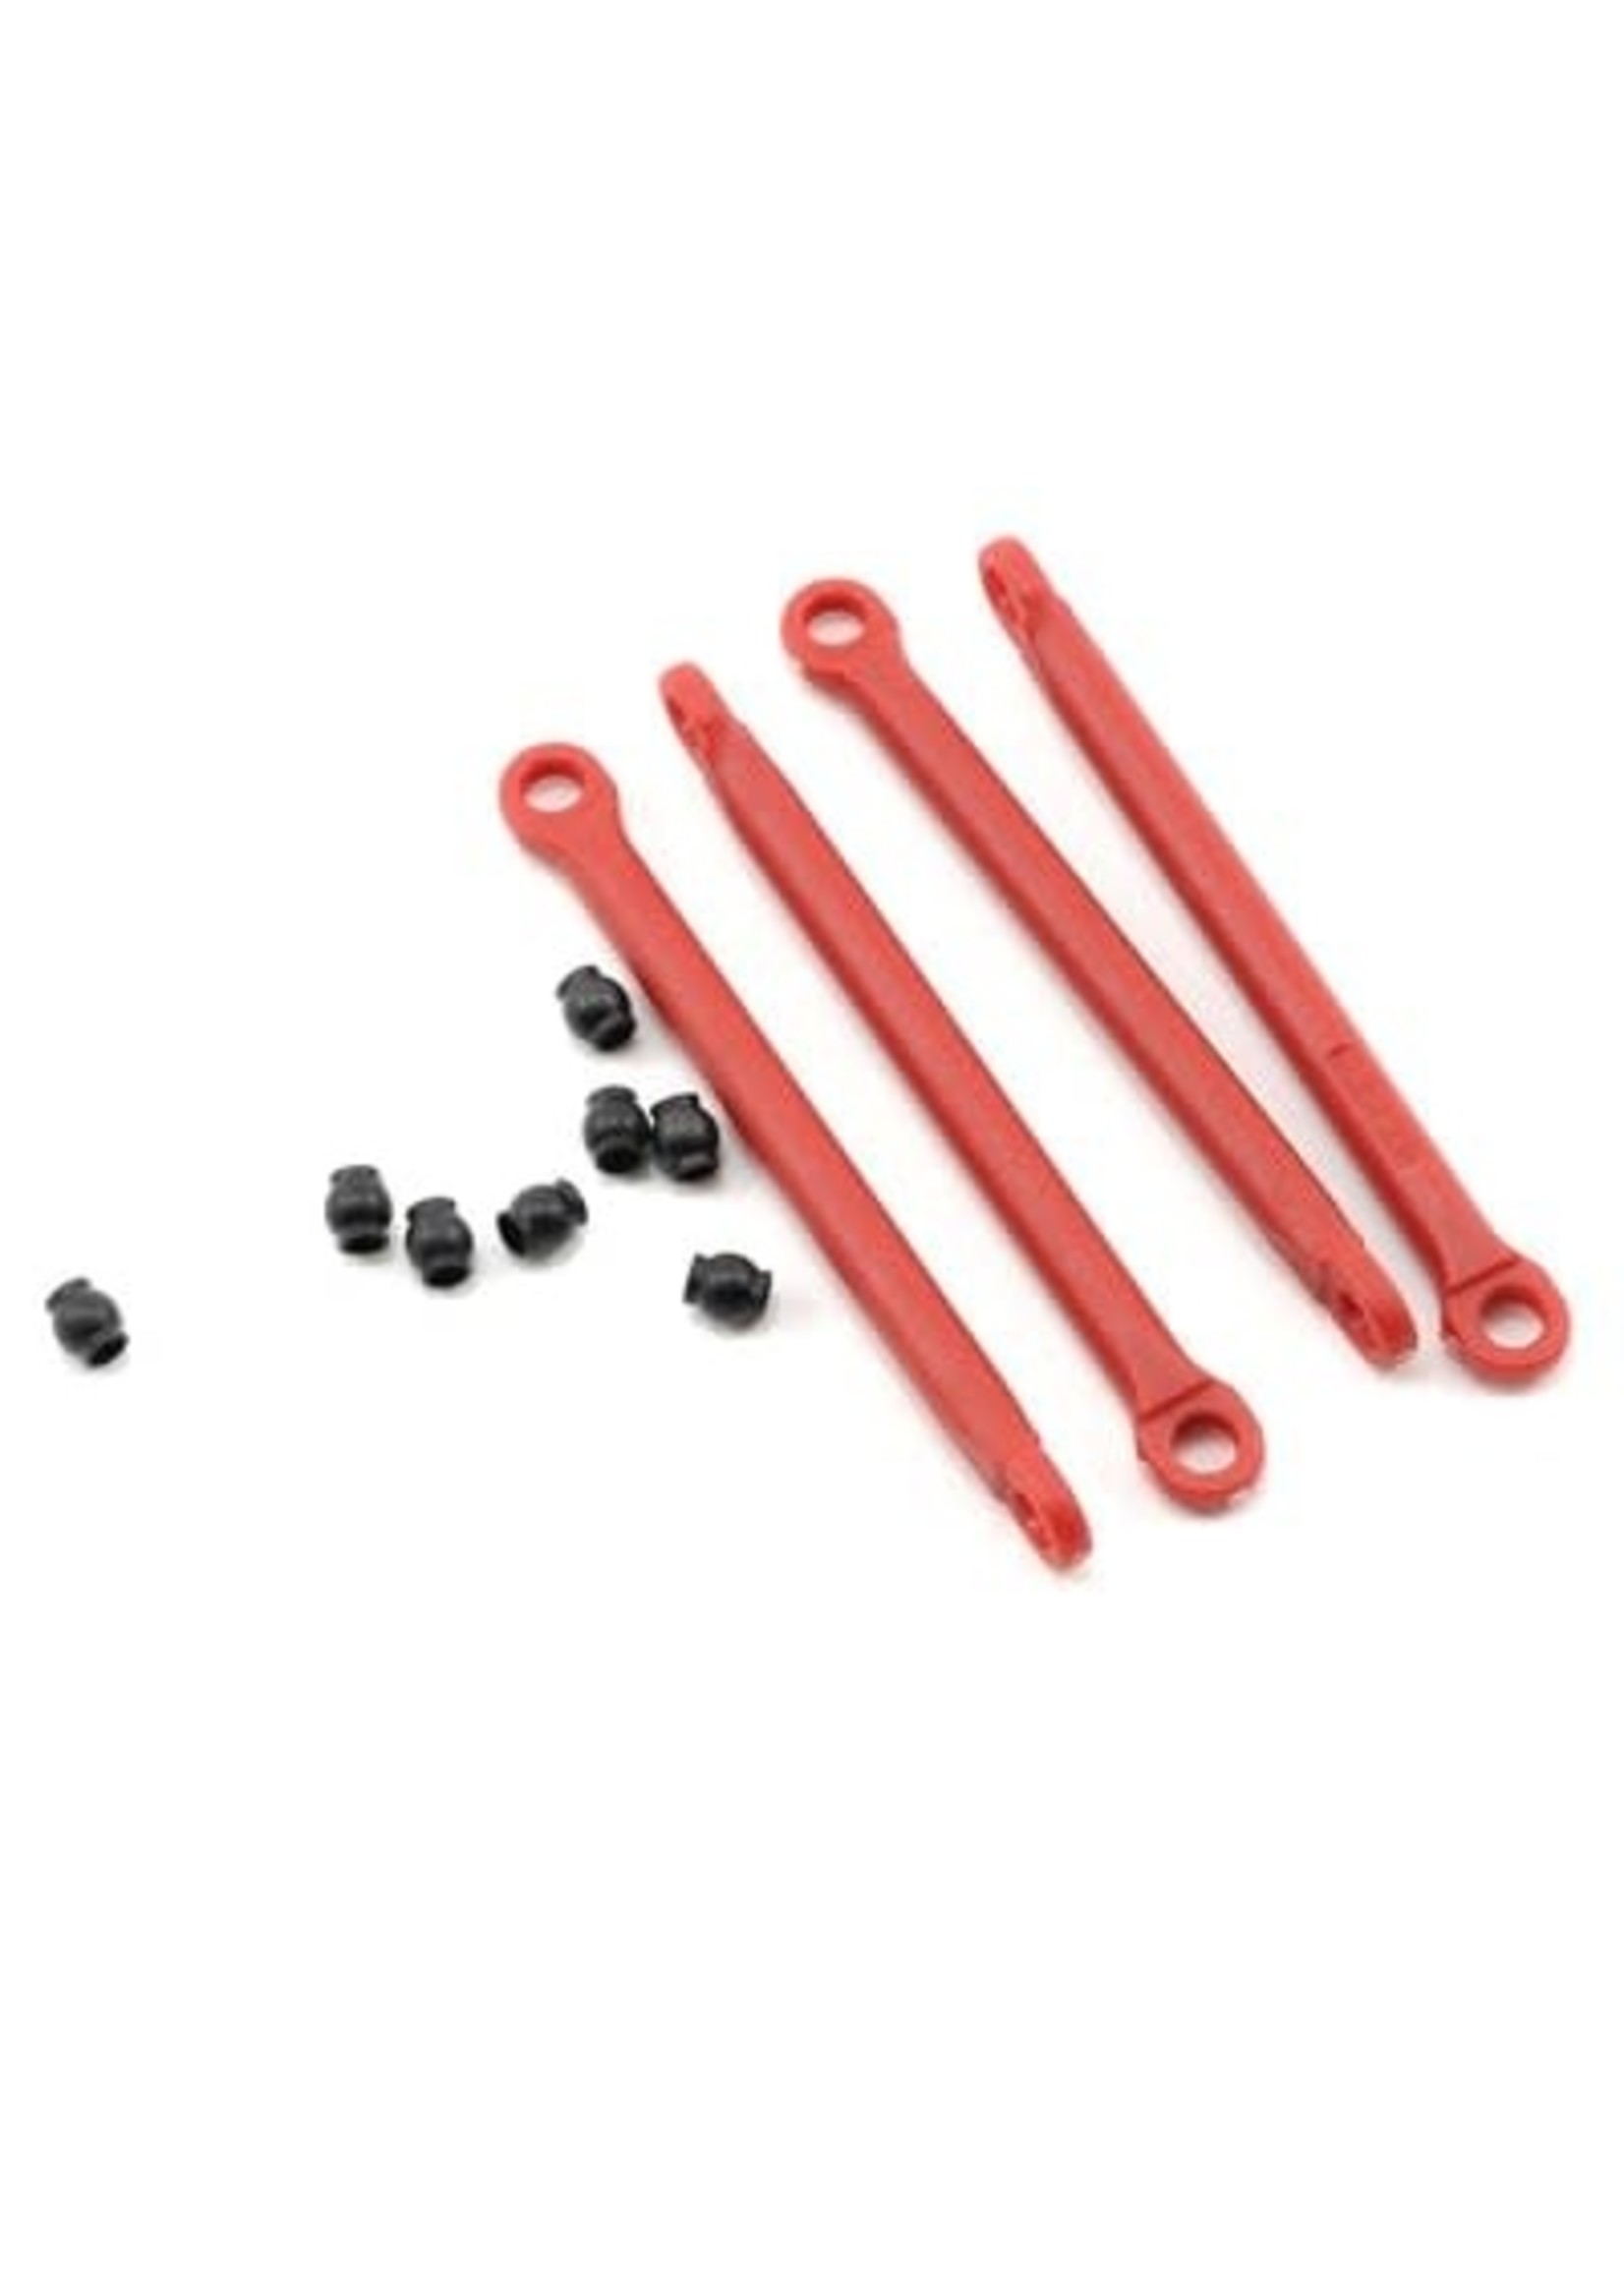 Traxxas 7118 Push rod (molded composite) (red) (4)/ hollow balls (8)